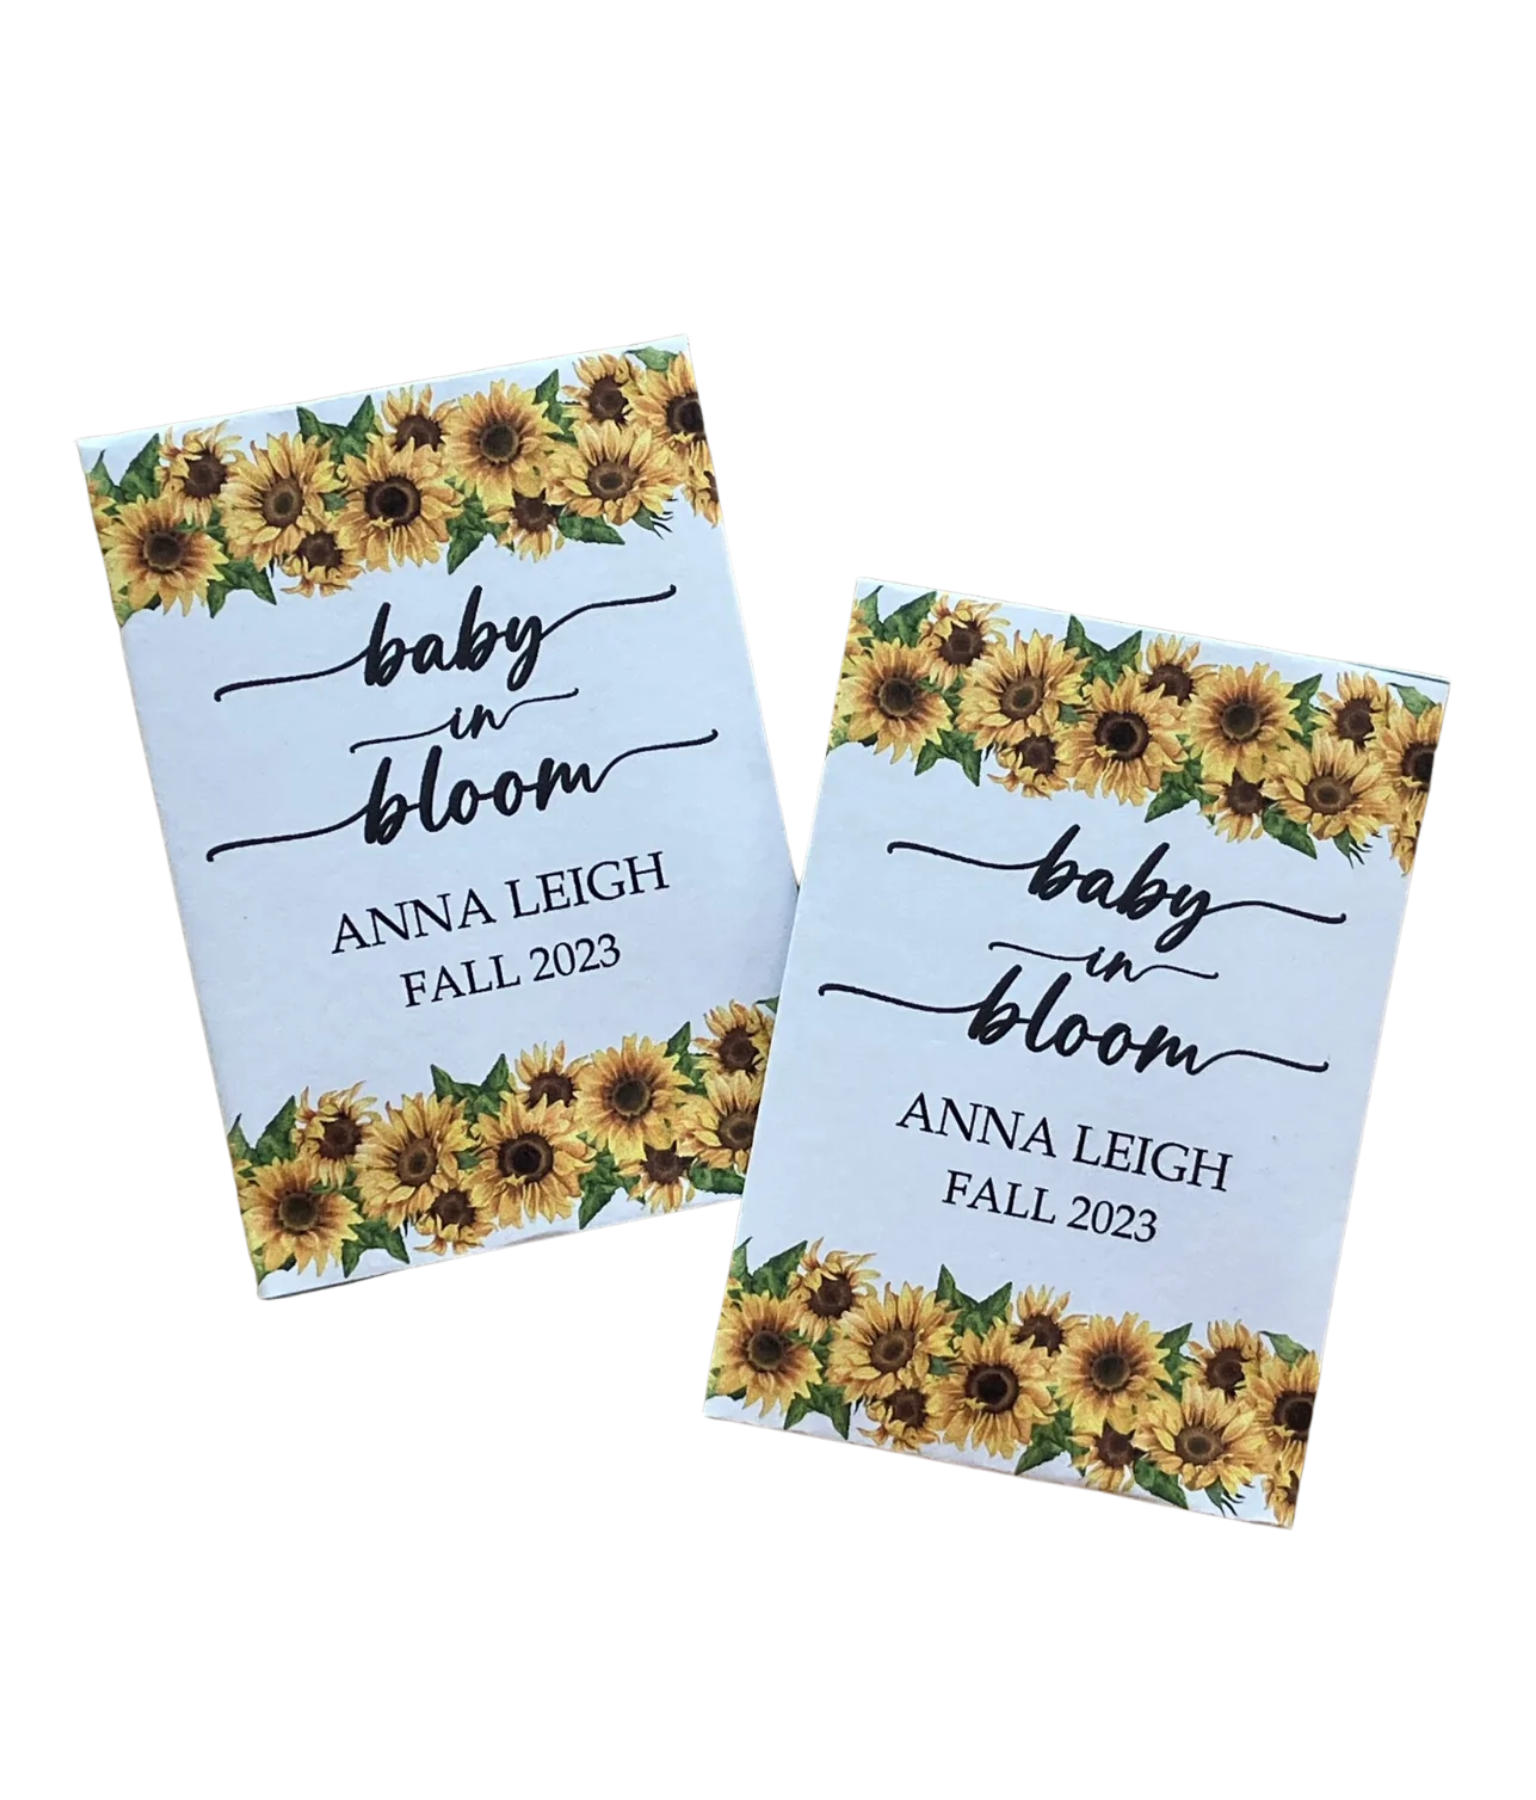 100 CM31 Pcs Sunflower Baby Shower Seed Packet Favors Seed Self